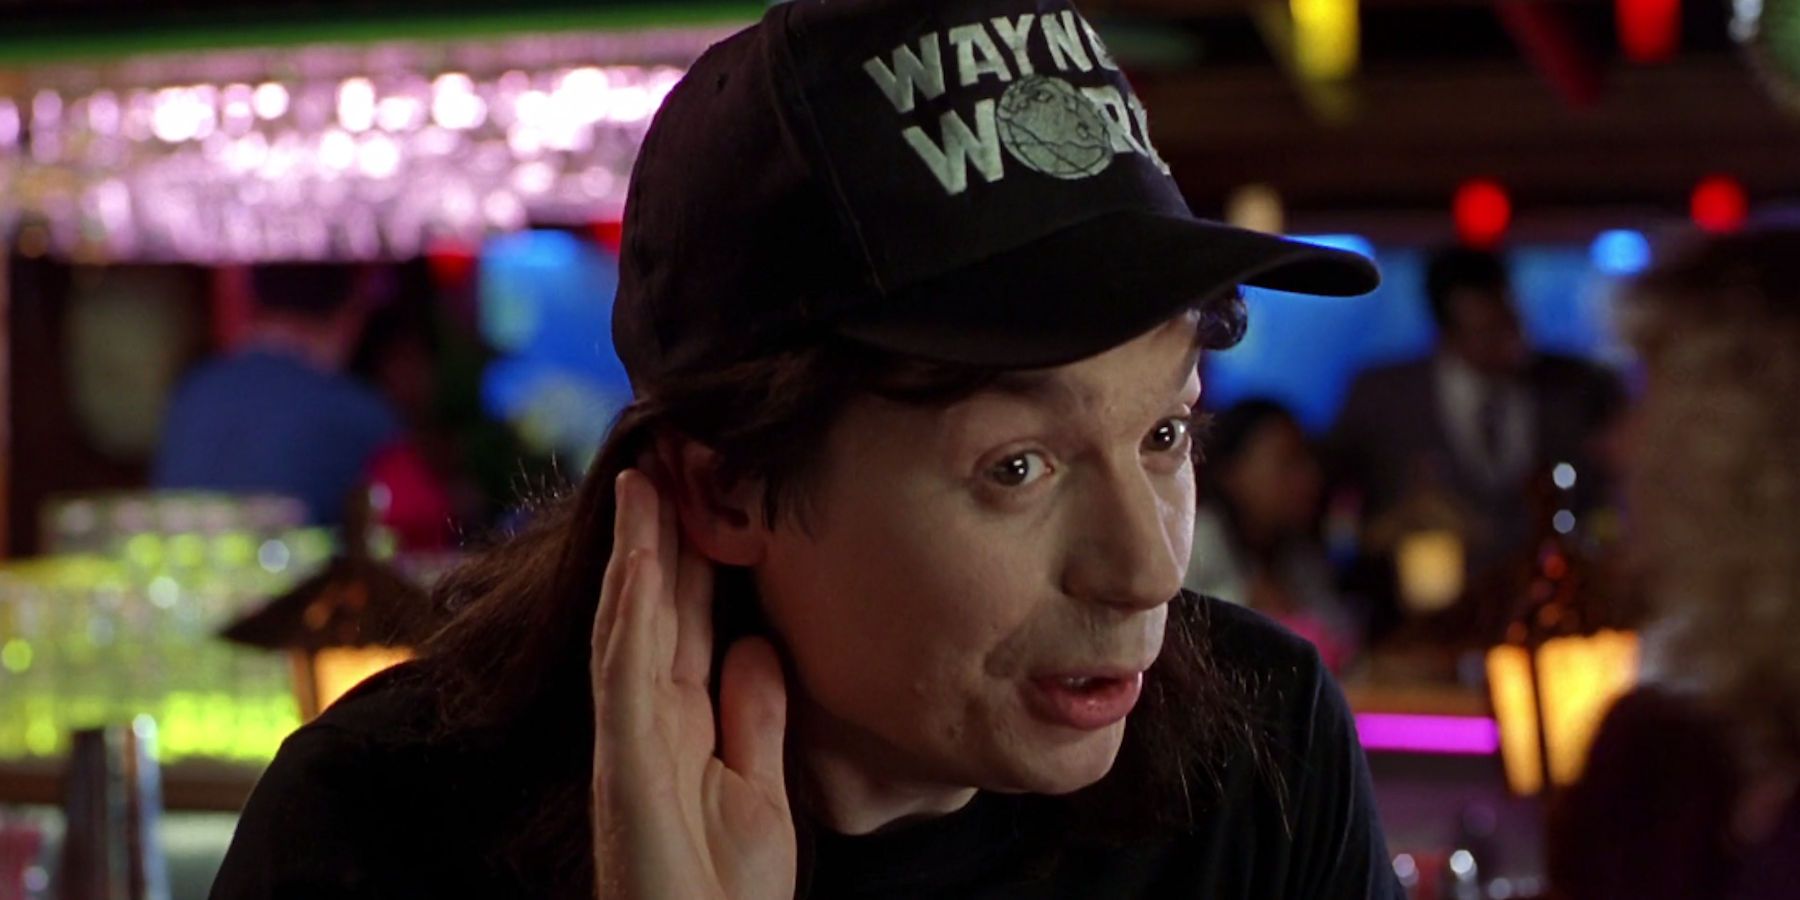 10 Funniest Quotes From The Waynes World Movies